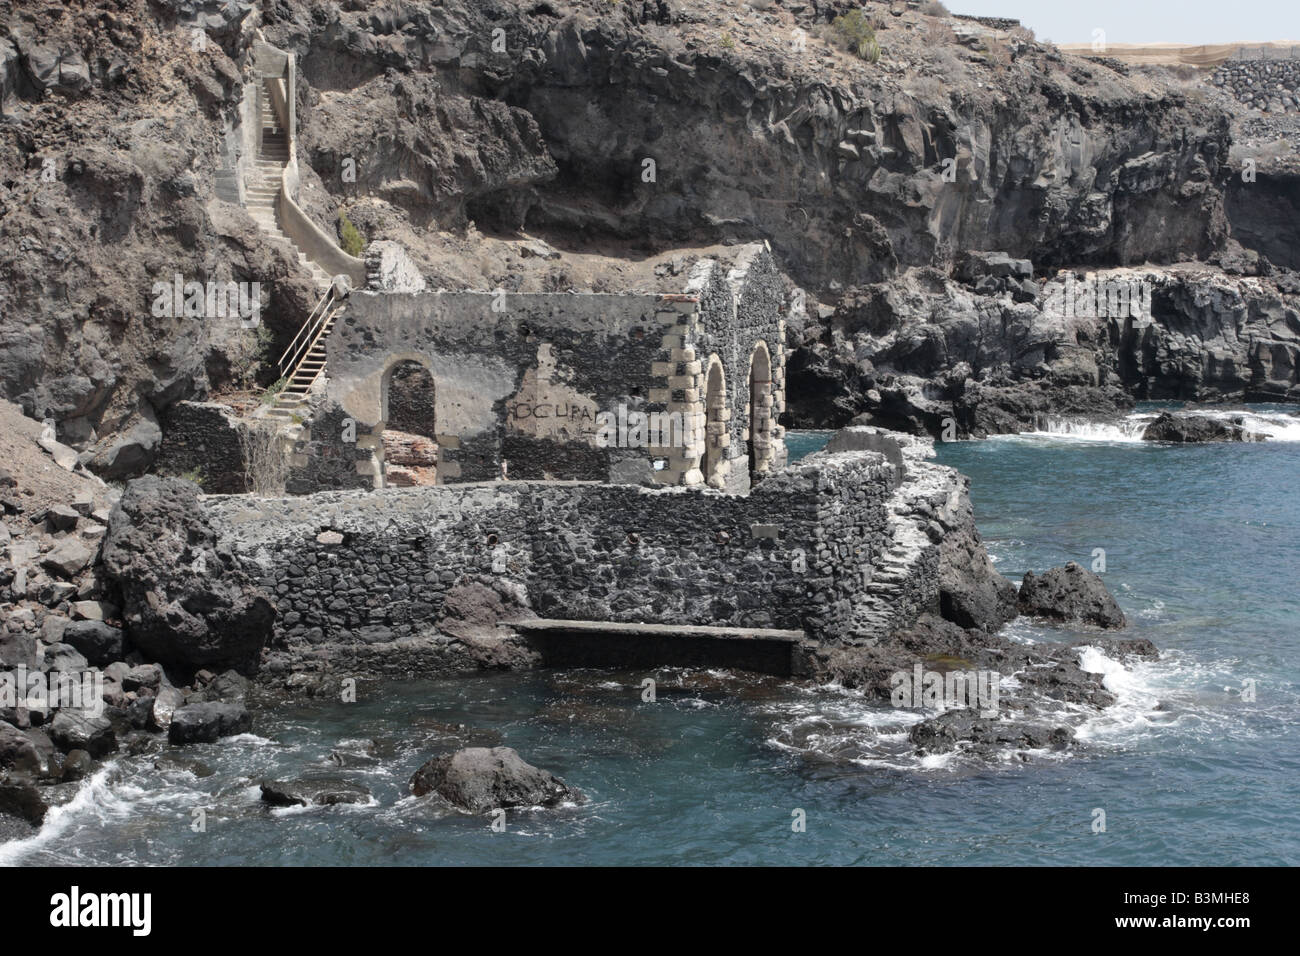 The ruins of an old pumphouse at the base of the cliff where fresh spring water was pumped up to the village of Aguadulce, Tenerife Stock Photo